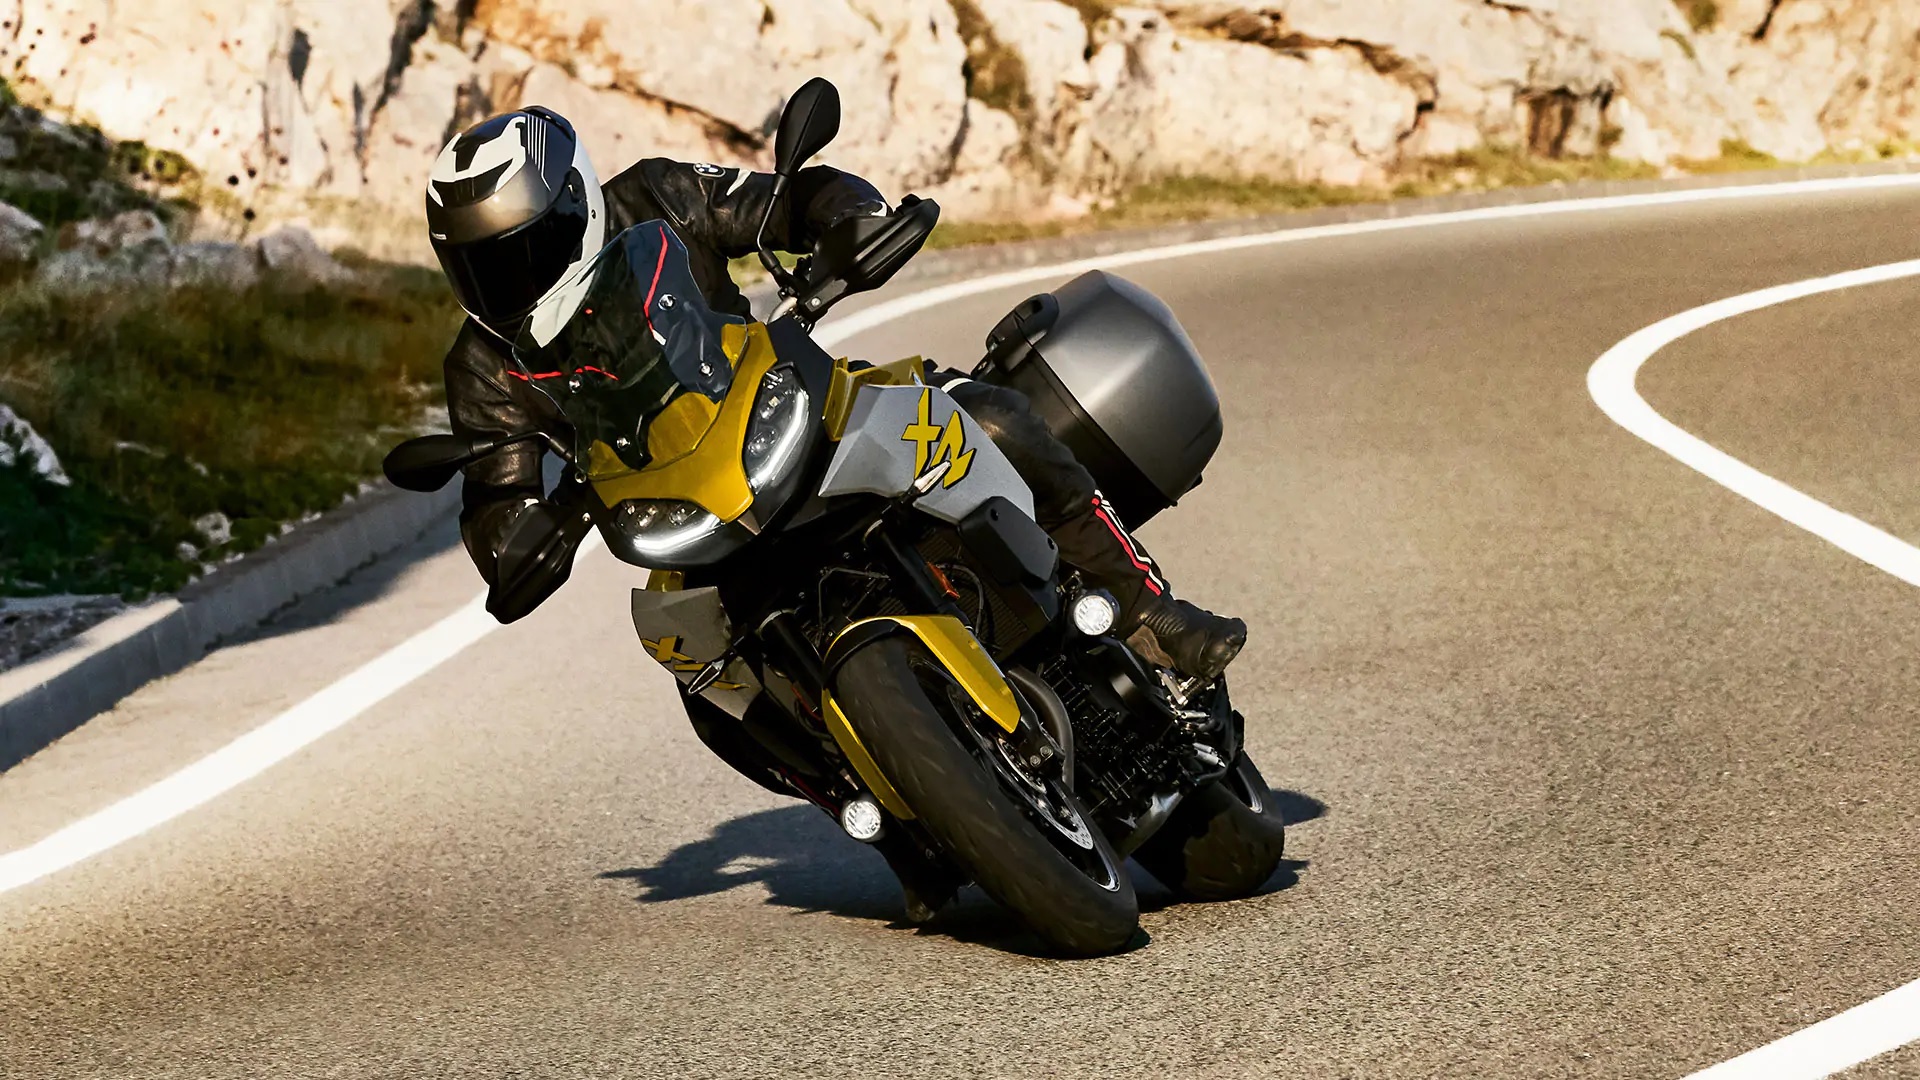 2021 BMW F 900 XR: Specs, Features, Photos, Colors, Price